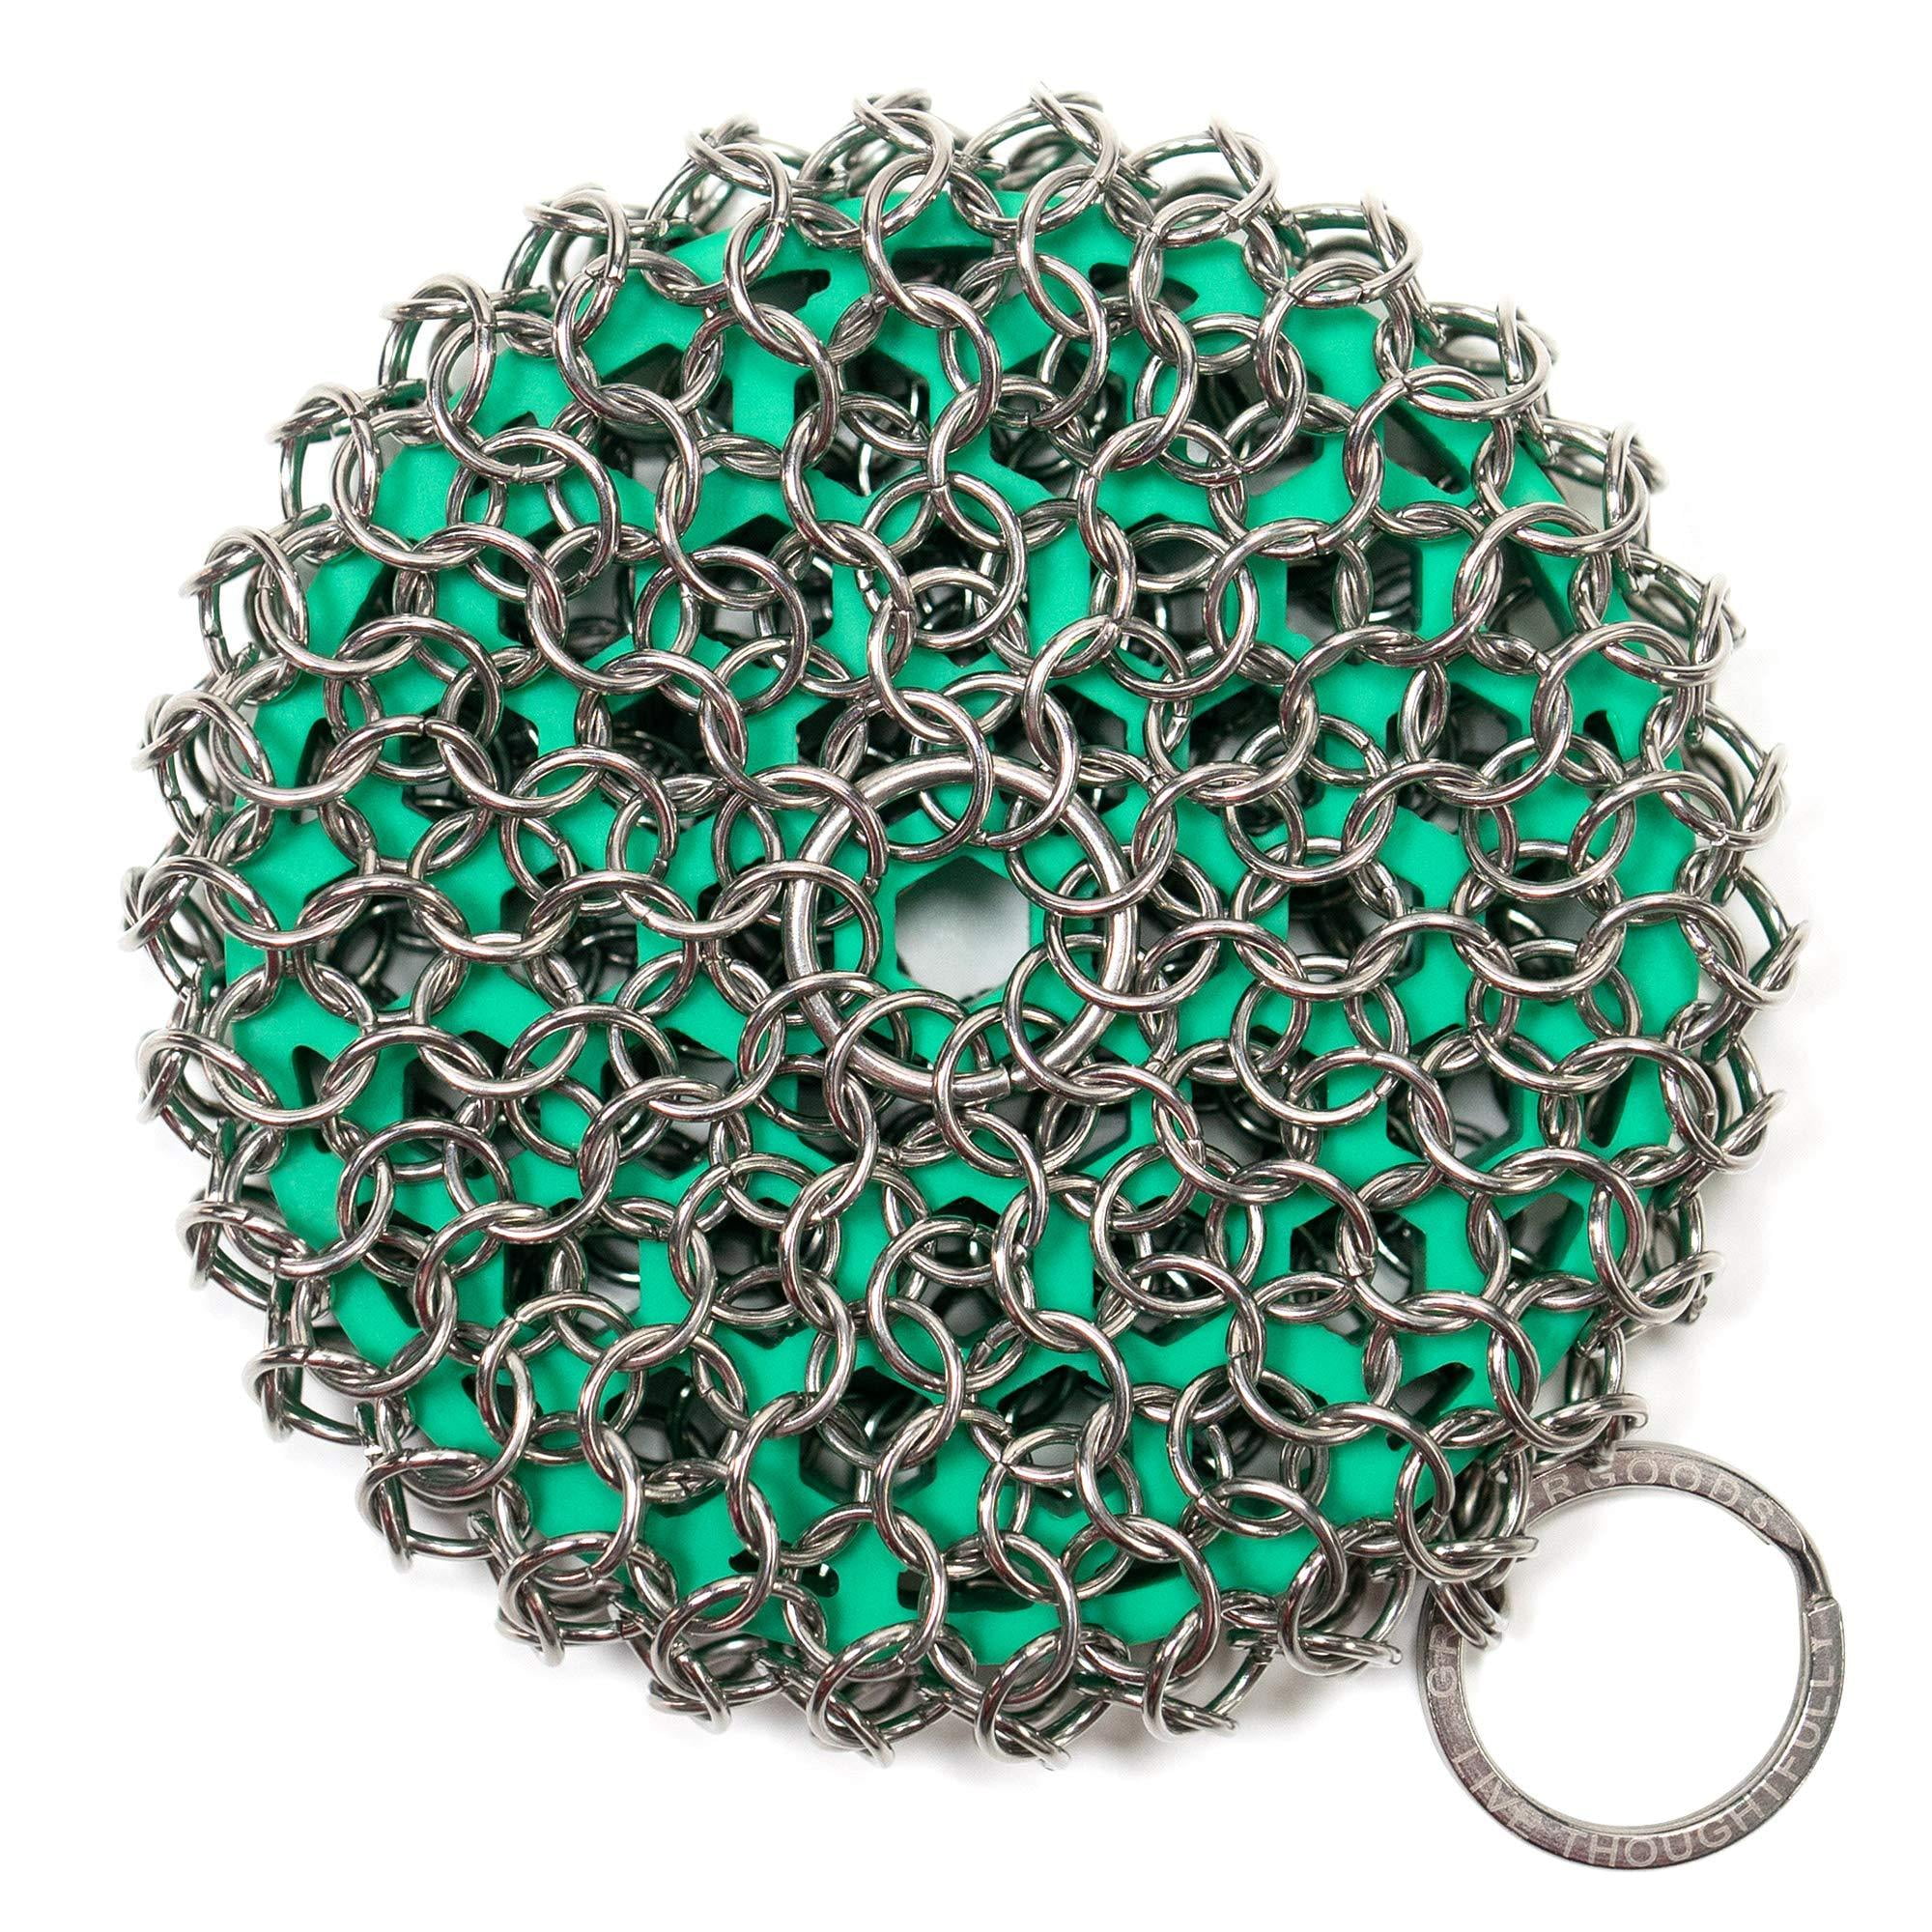 Greater Goods Chainmail Scrubber - Clean The Cast Iron Like A Pro